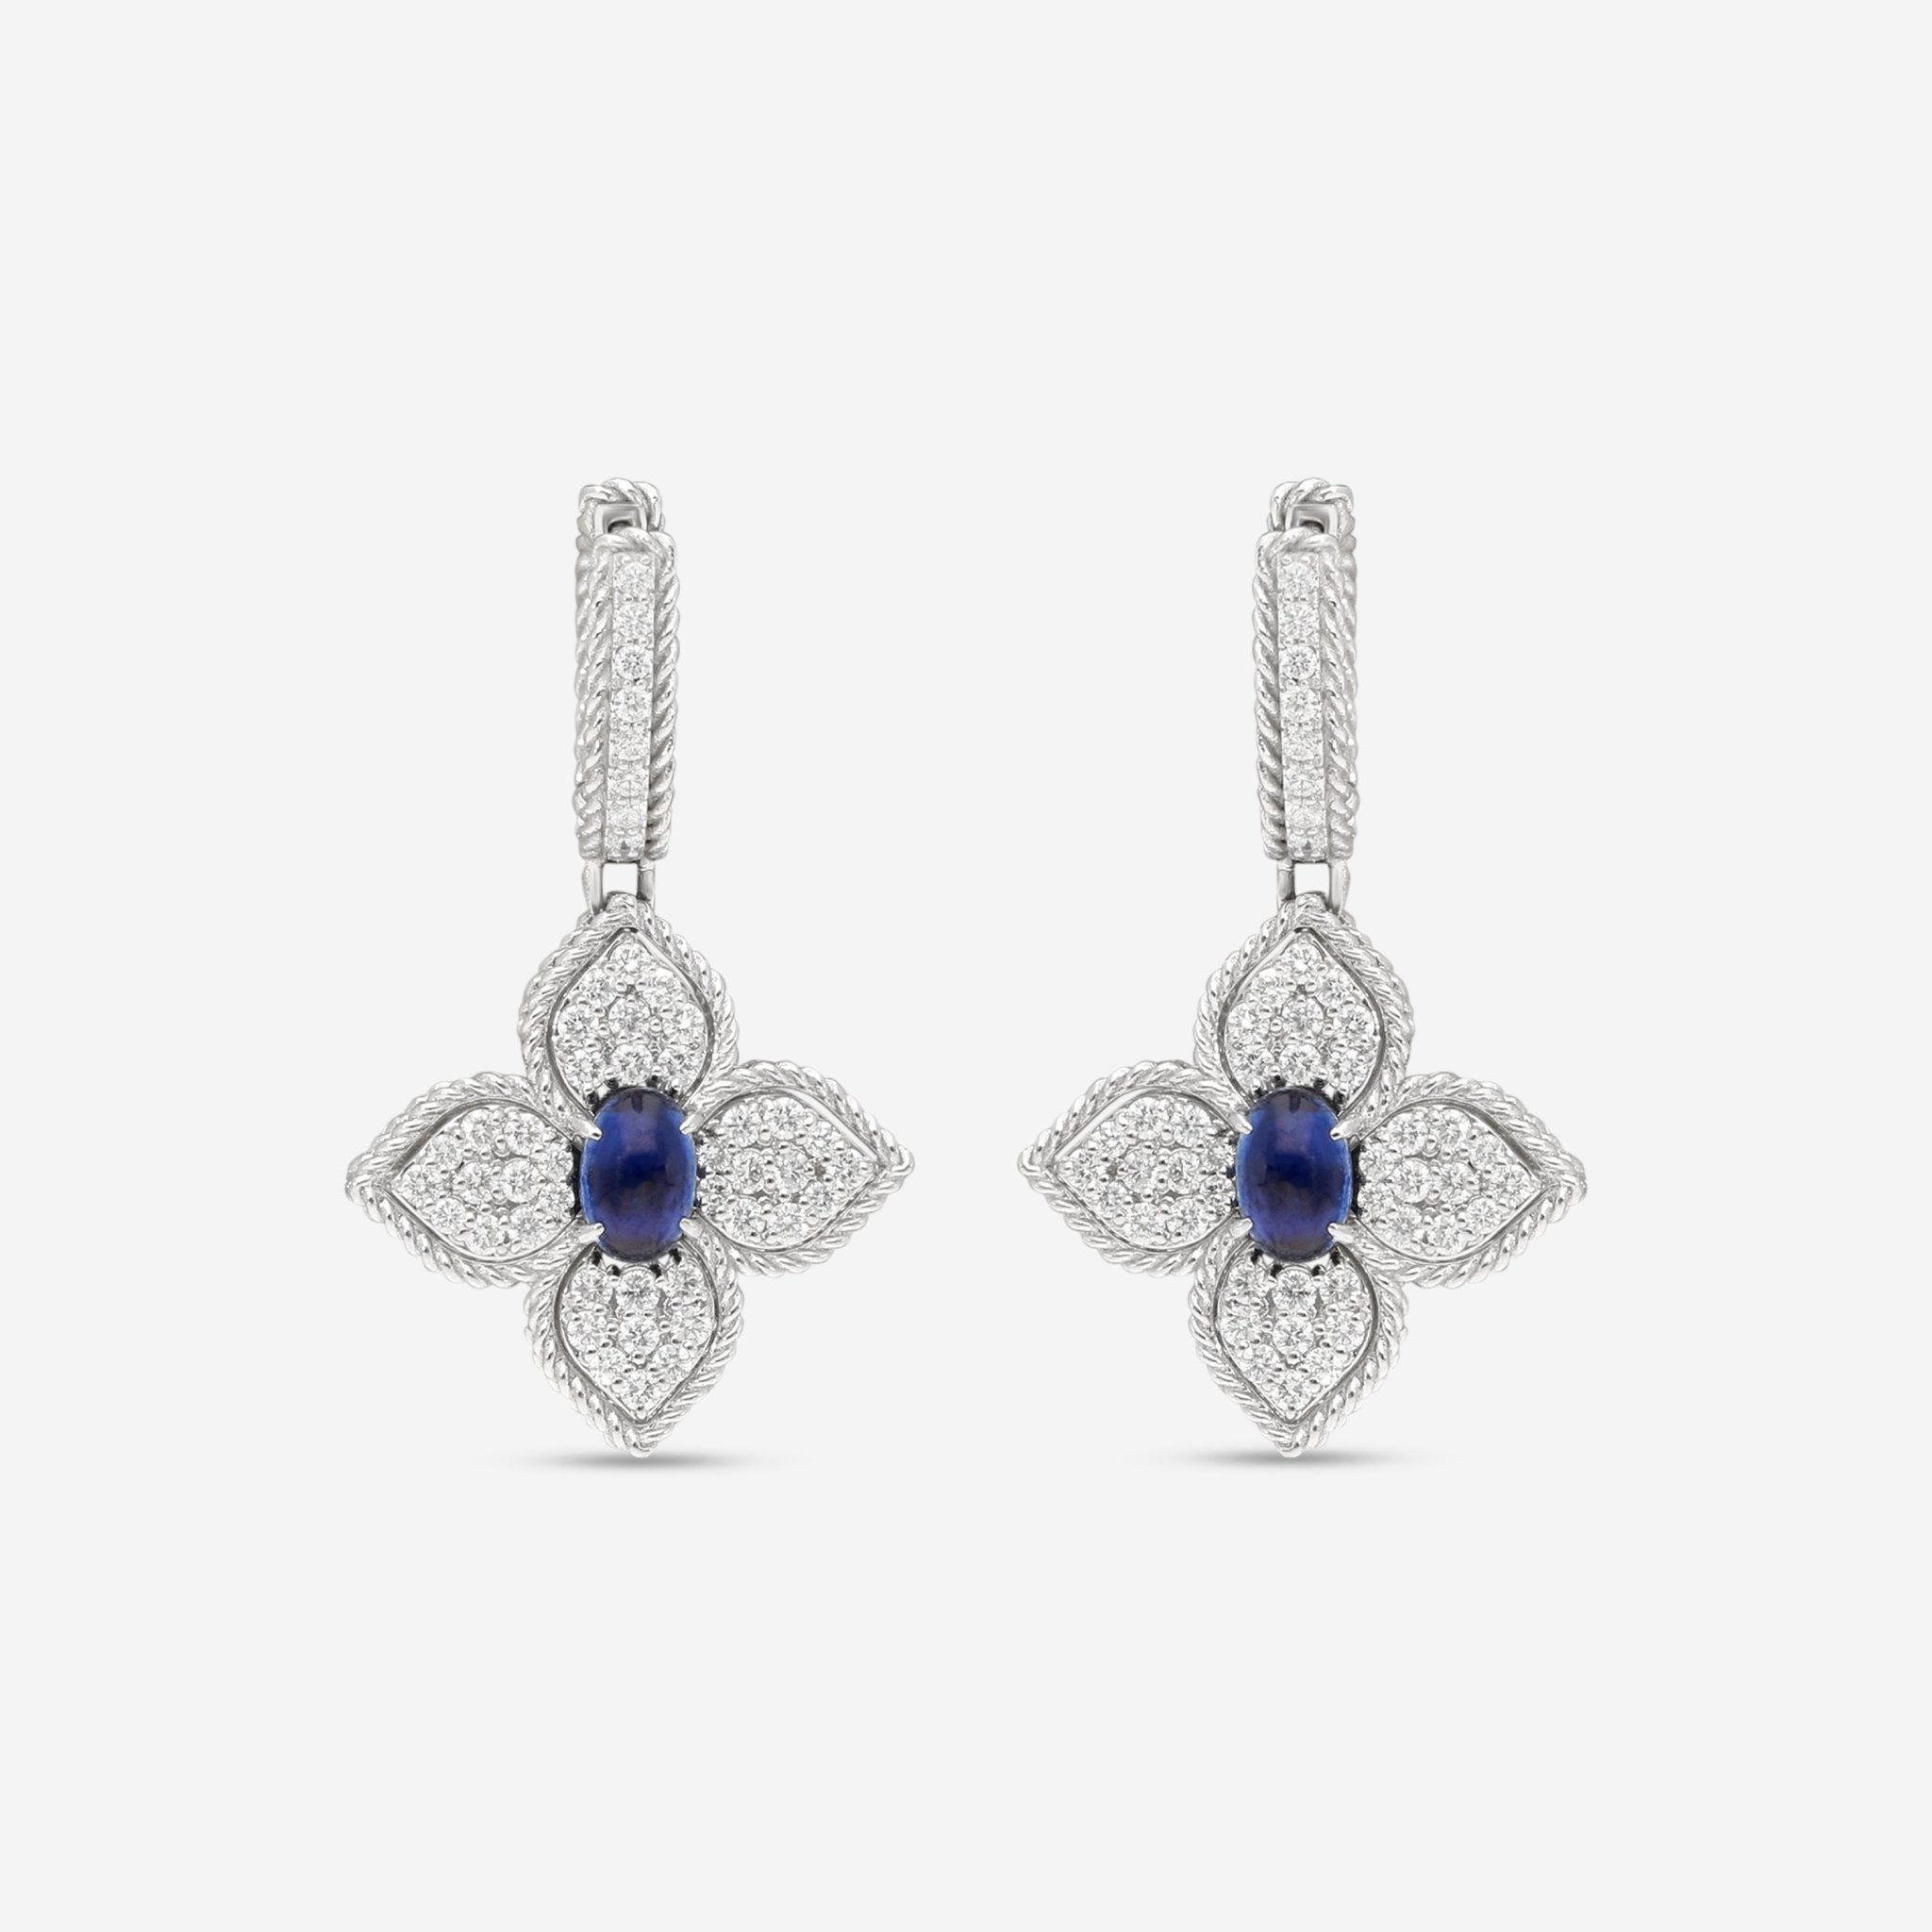 Roberto Coin Princess 18K White Gold, Diamond and Blue Sapphire Flower Earrings 7772027AWERS - THE SOLIST - Roberto Coin